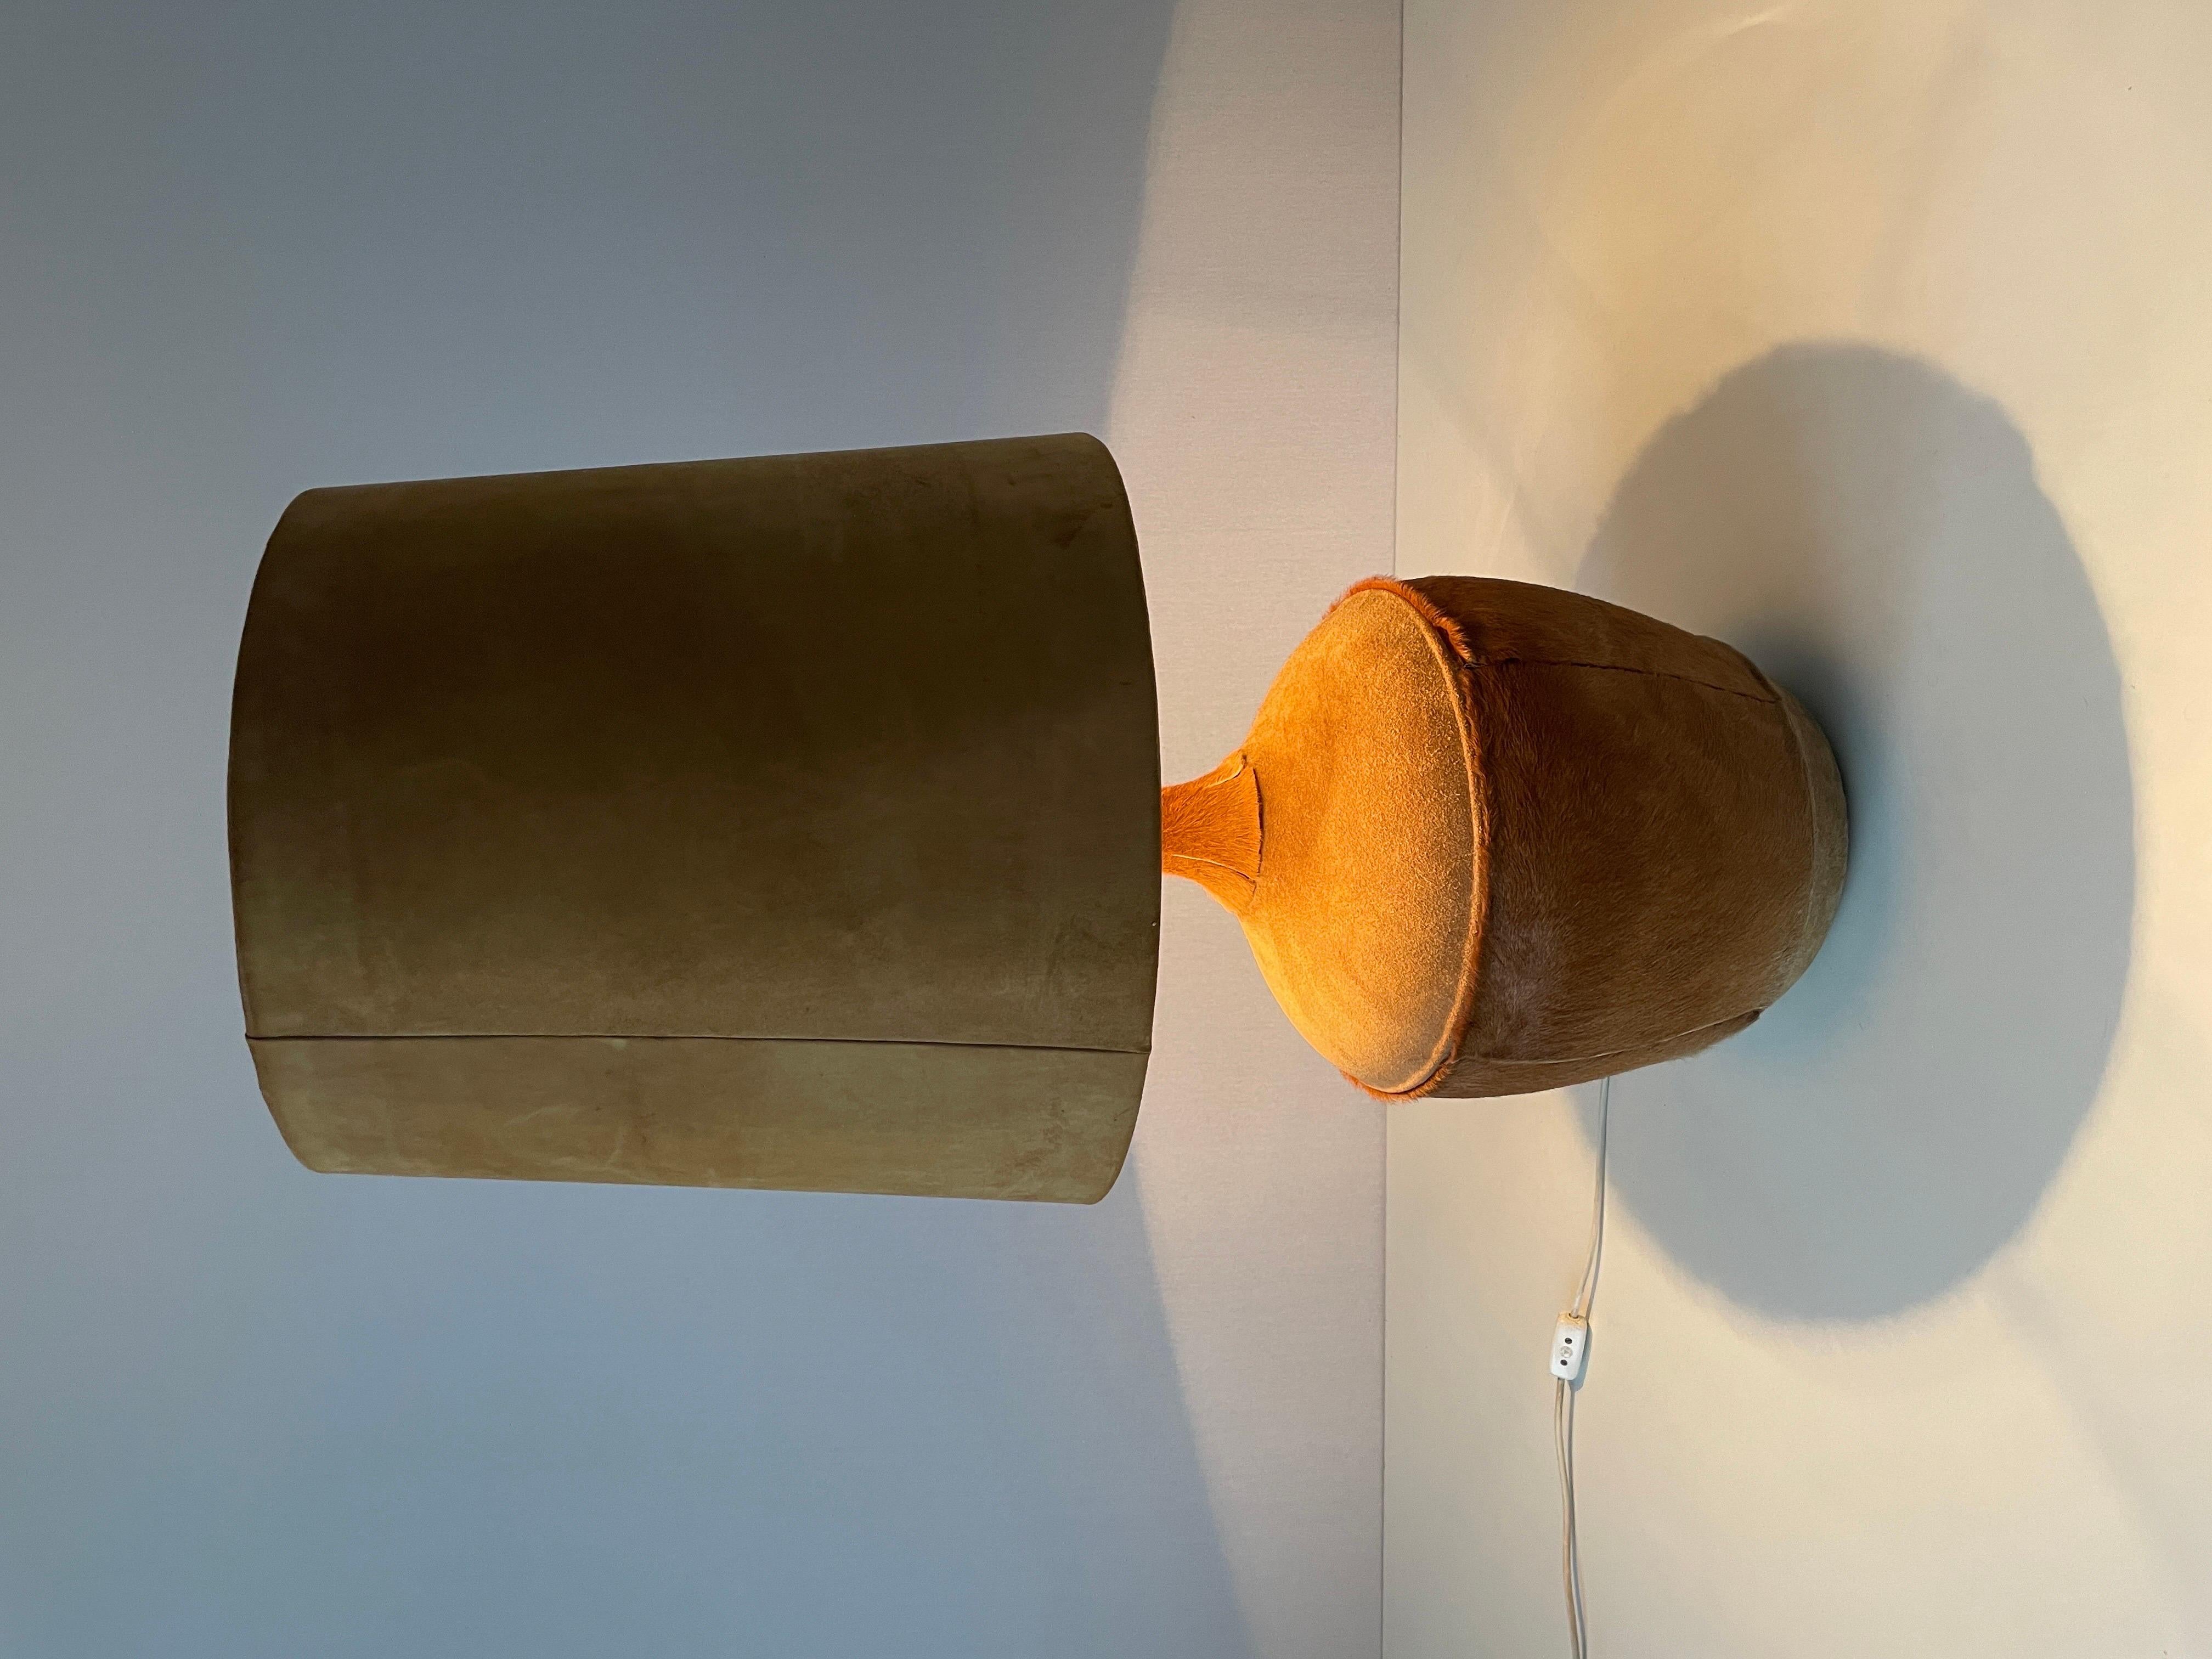 Tan Suede Leather and Glass Shade Floor or Table Lamp, 1960s, Denmark For Sale 6